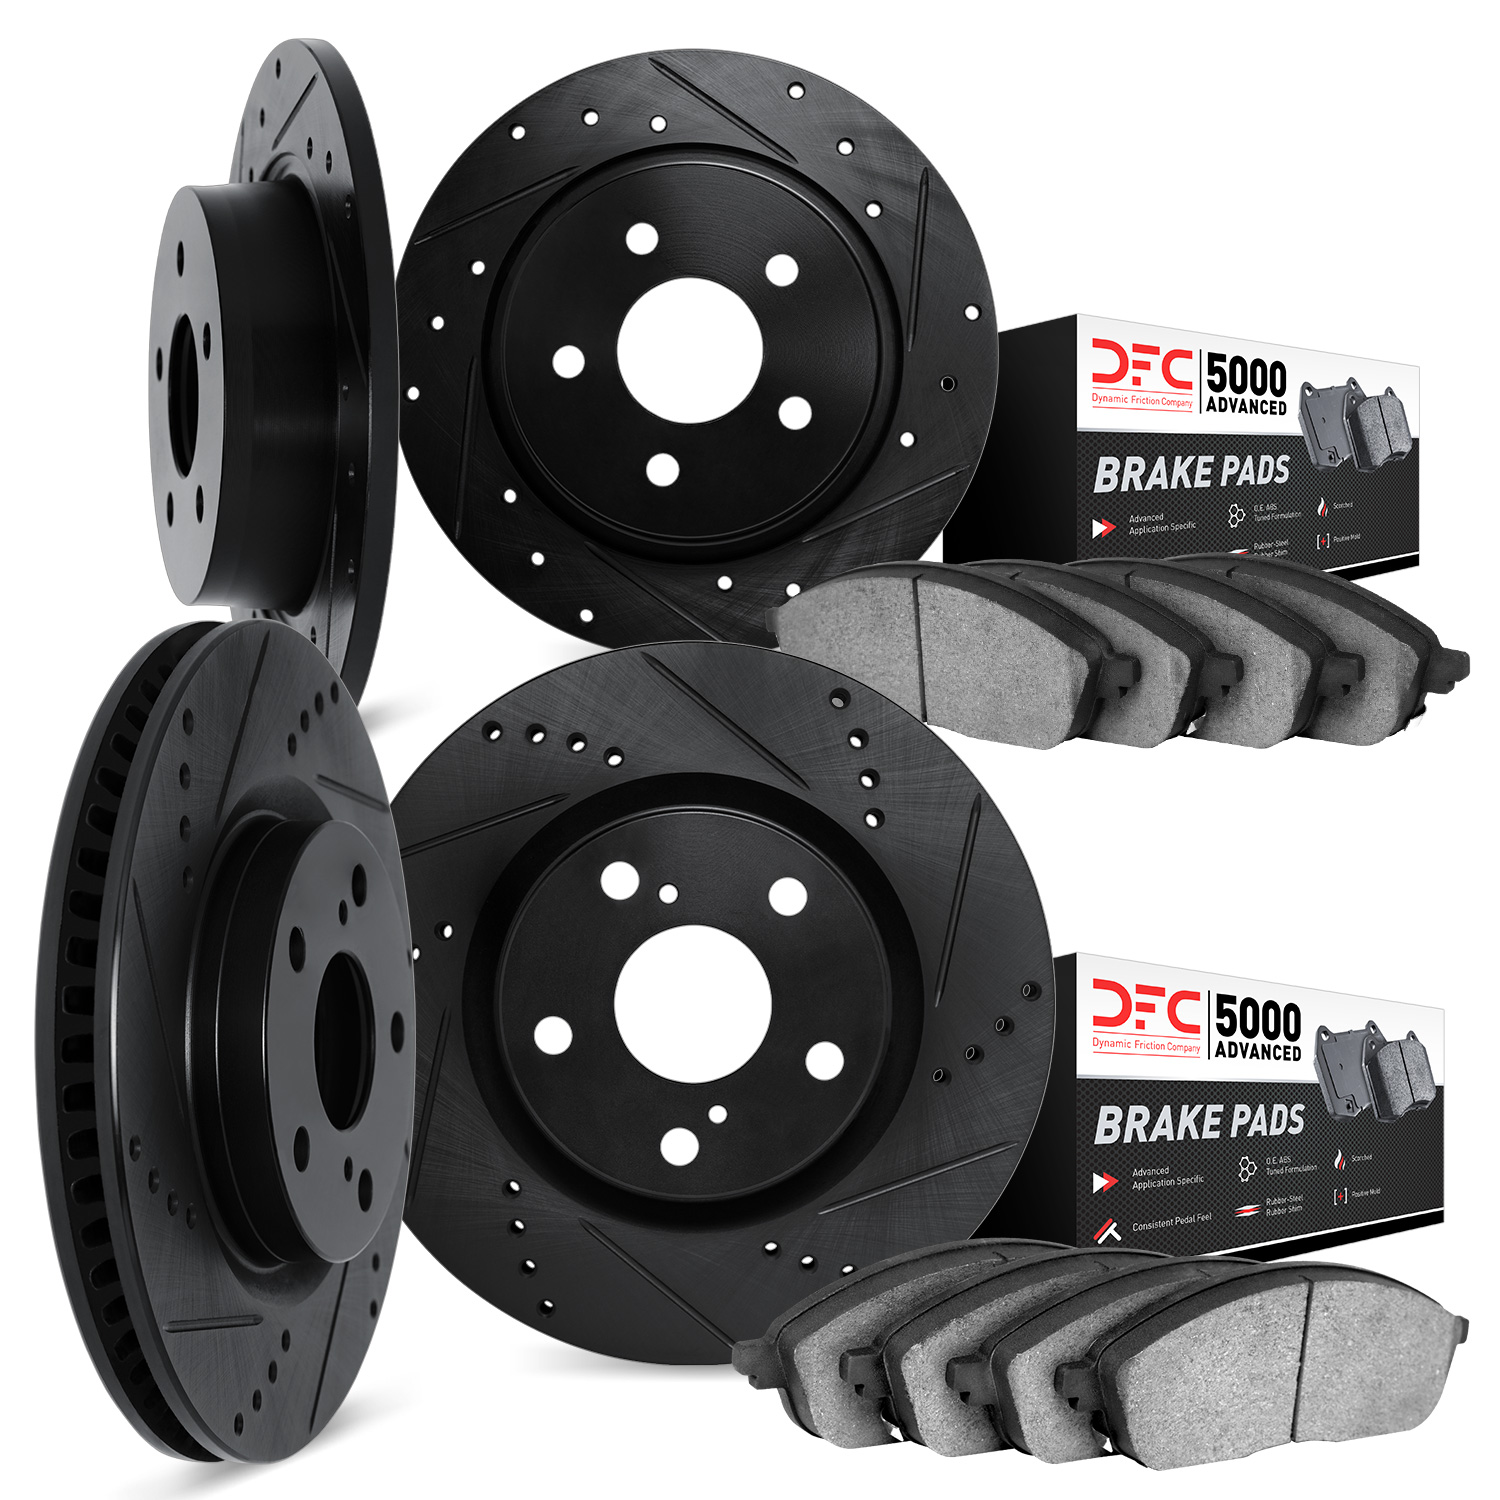 8504-74058 Drilled/Slotted Brake Rotors w/5000 Advanced Brake Pads Kit [Black], 2008-2015 Audi/Volkswagen, Position: Front and R